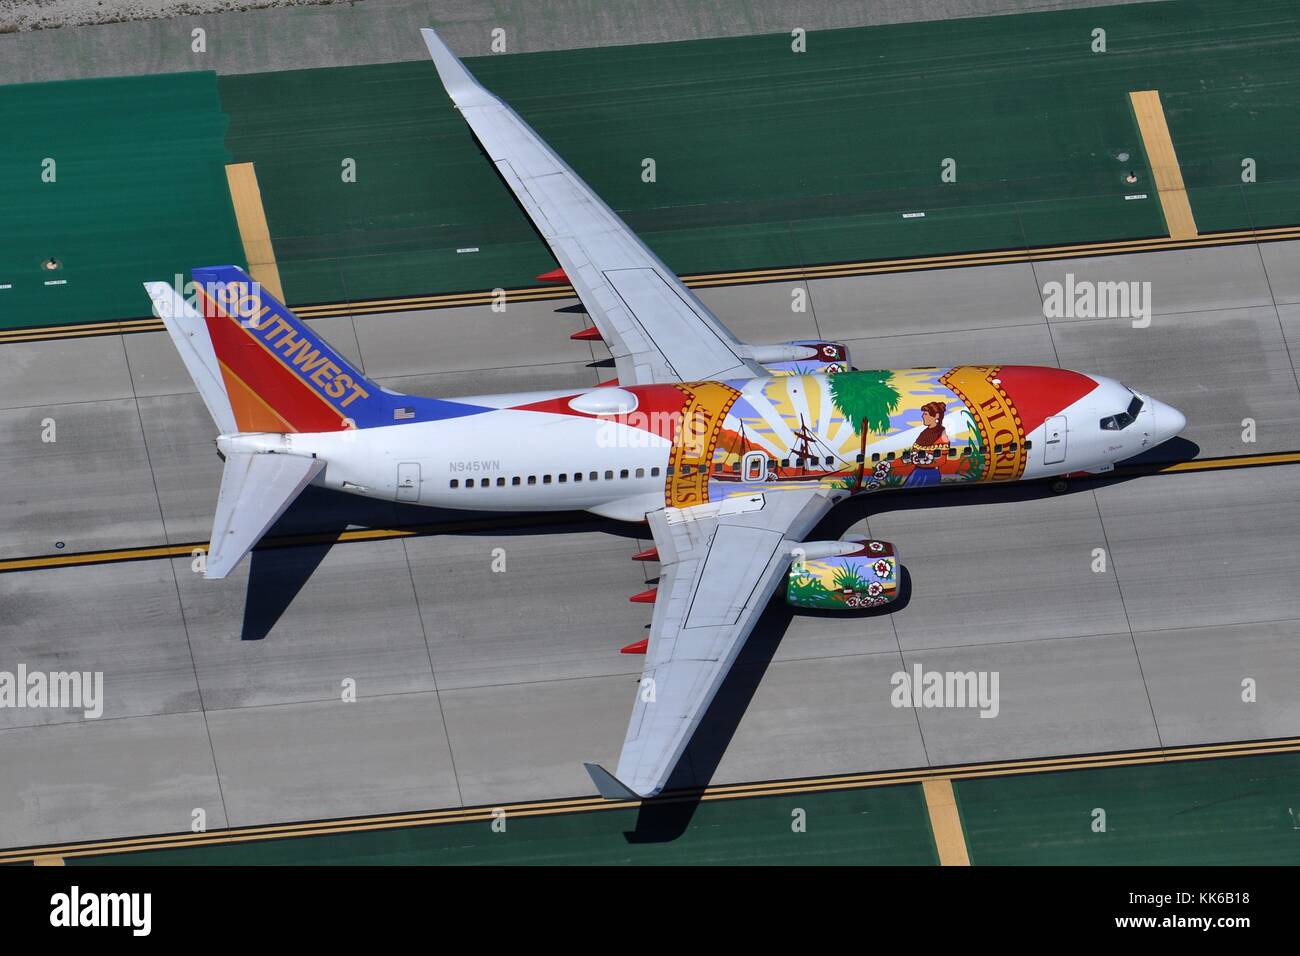 SOUTHWEST AIRLINES BOEING 737-700(W) N945WN IN STATE OF FLORIDA PROMOTIONAL LIVERY Stock Photo